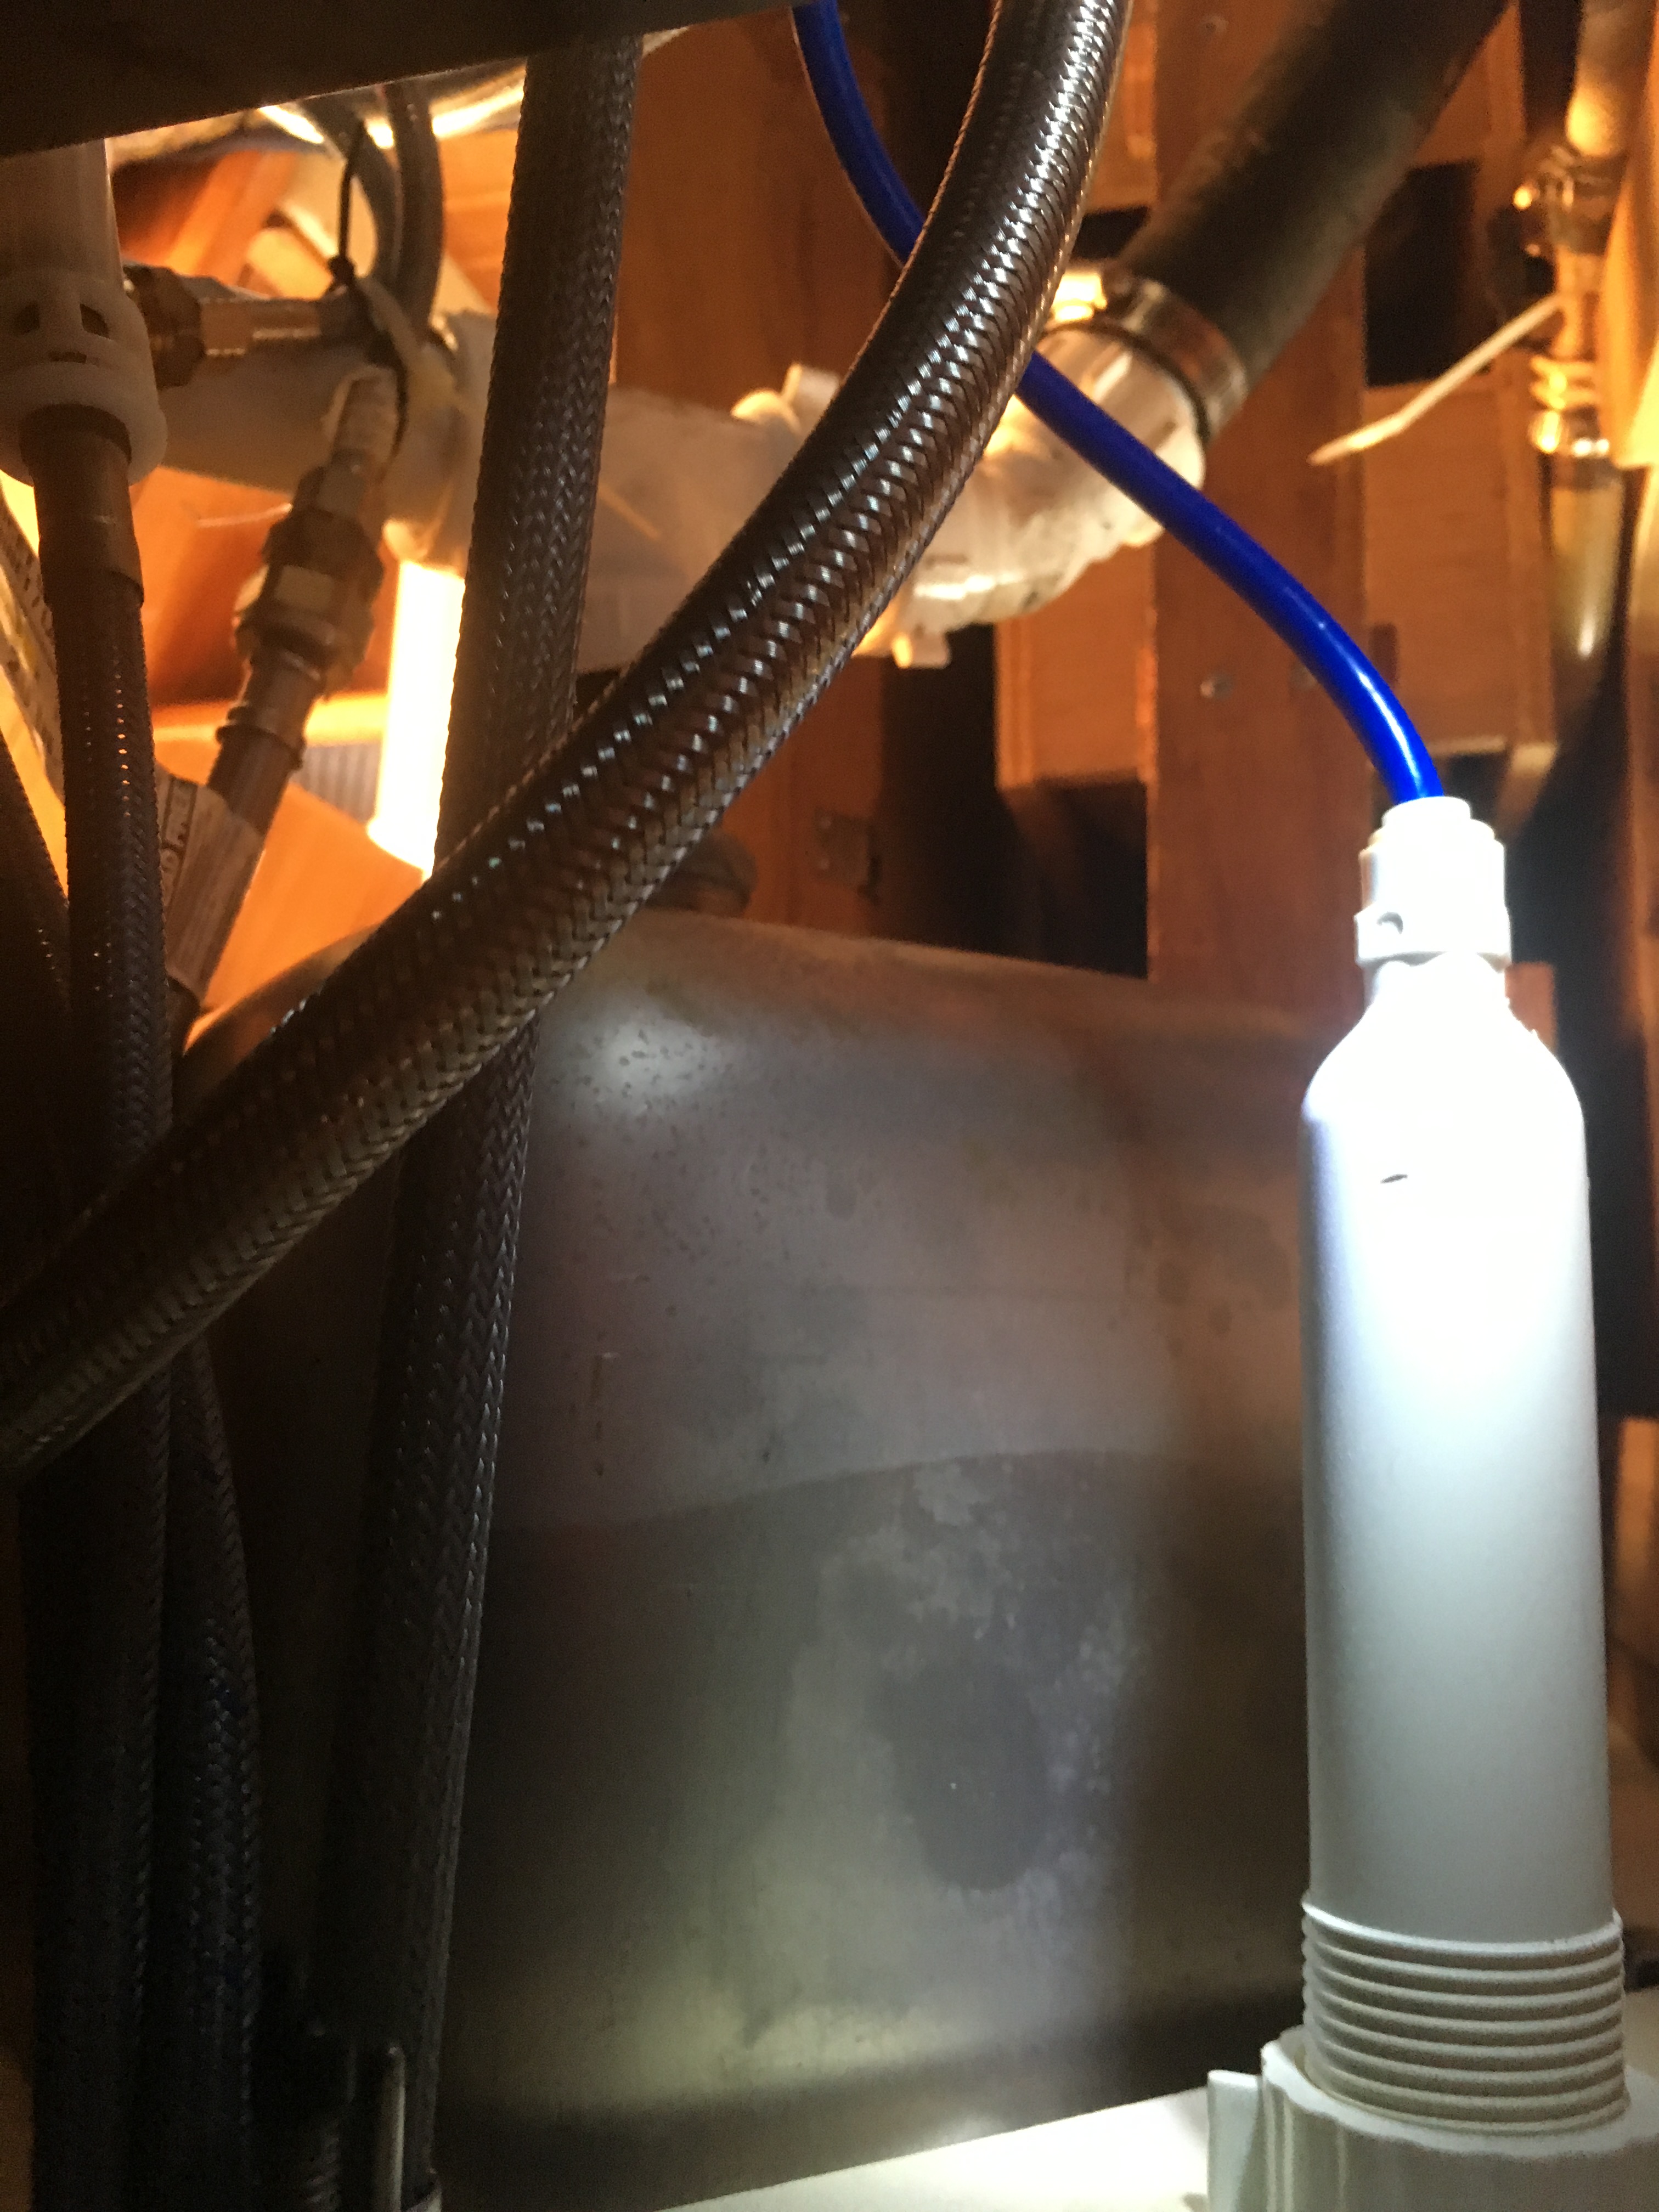 What you see under the sink of a 40-foot sloop with a water filtration system.